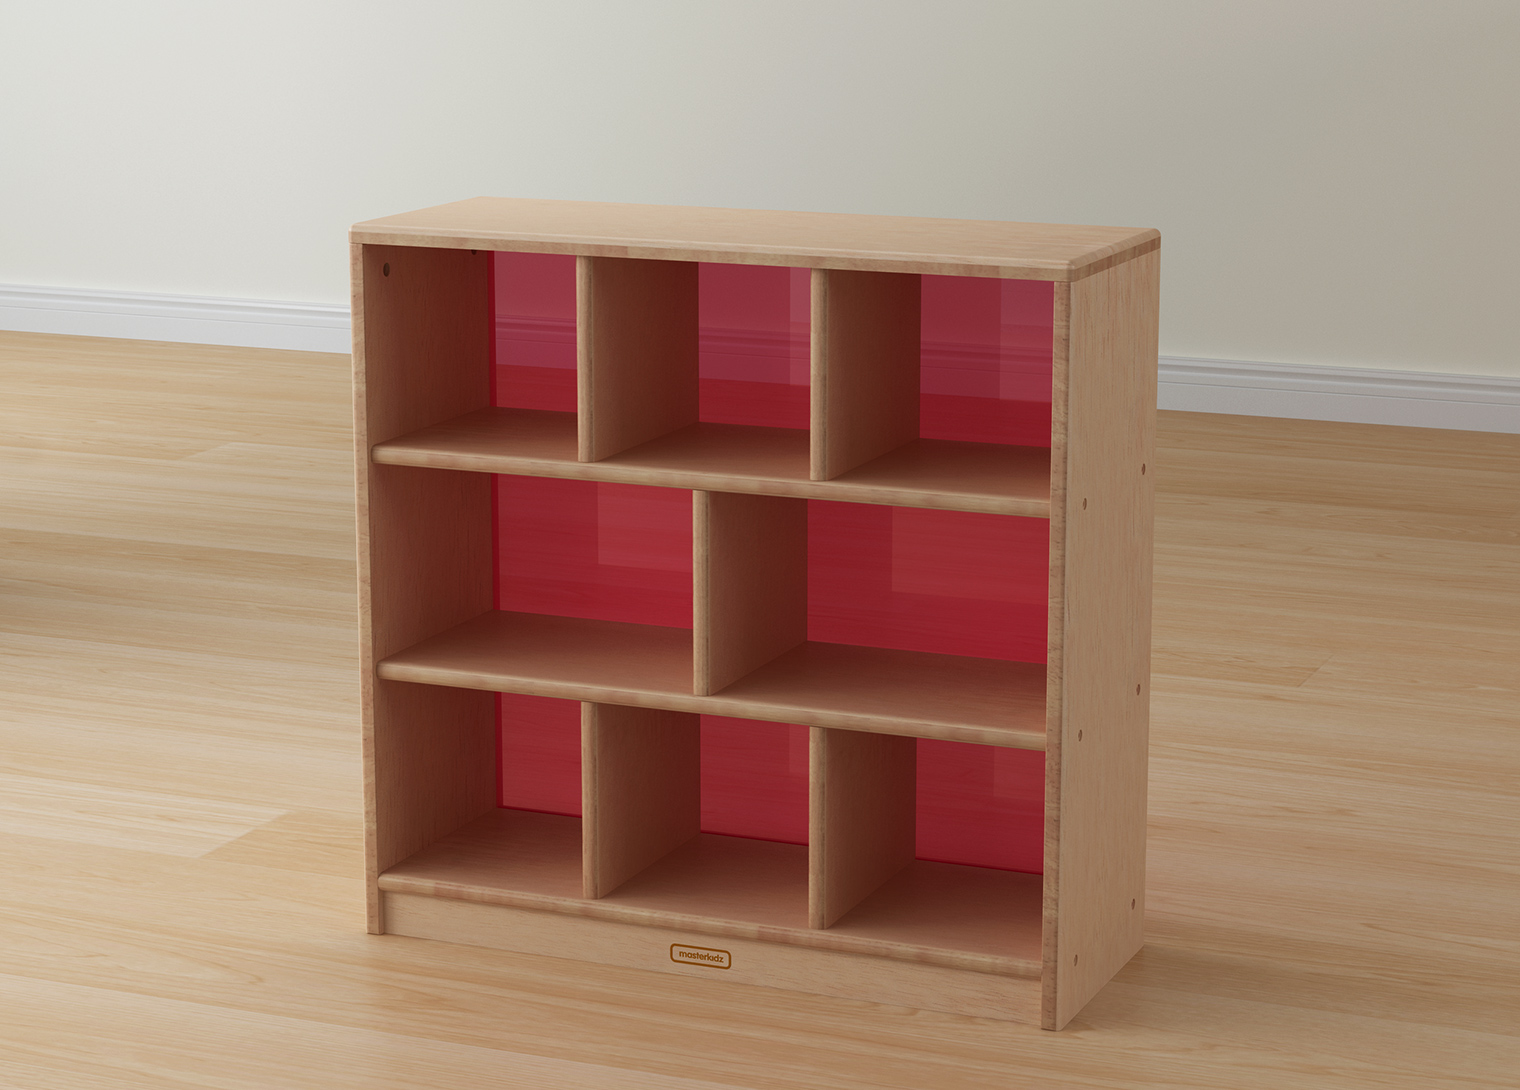 Bern - 789H x 810L Natural Rubber Wood  8-Compartment Shelving Unit - Translucent Red Back